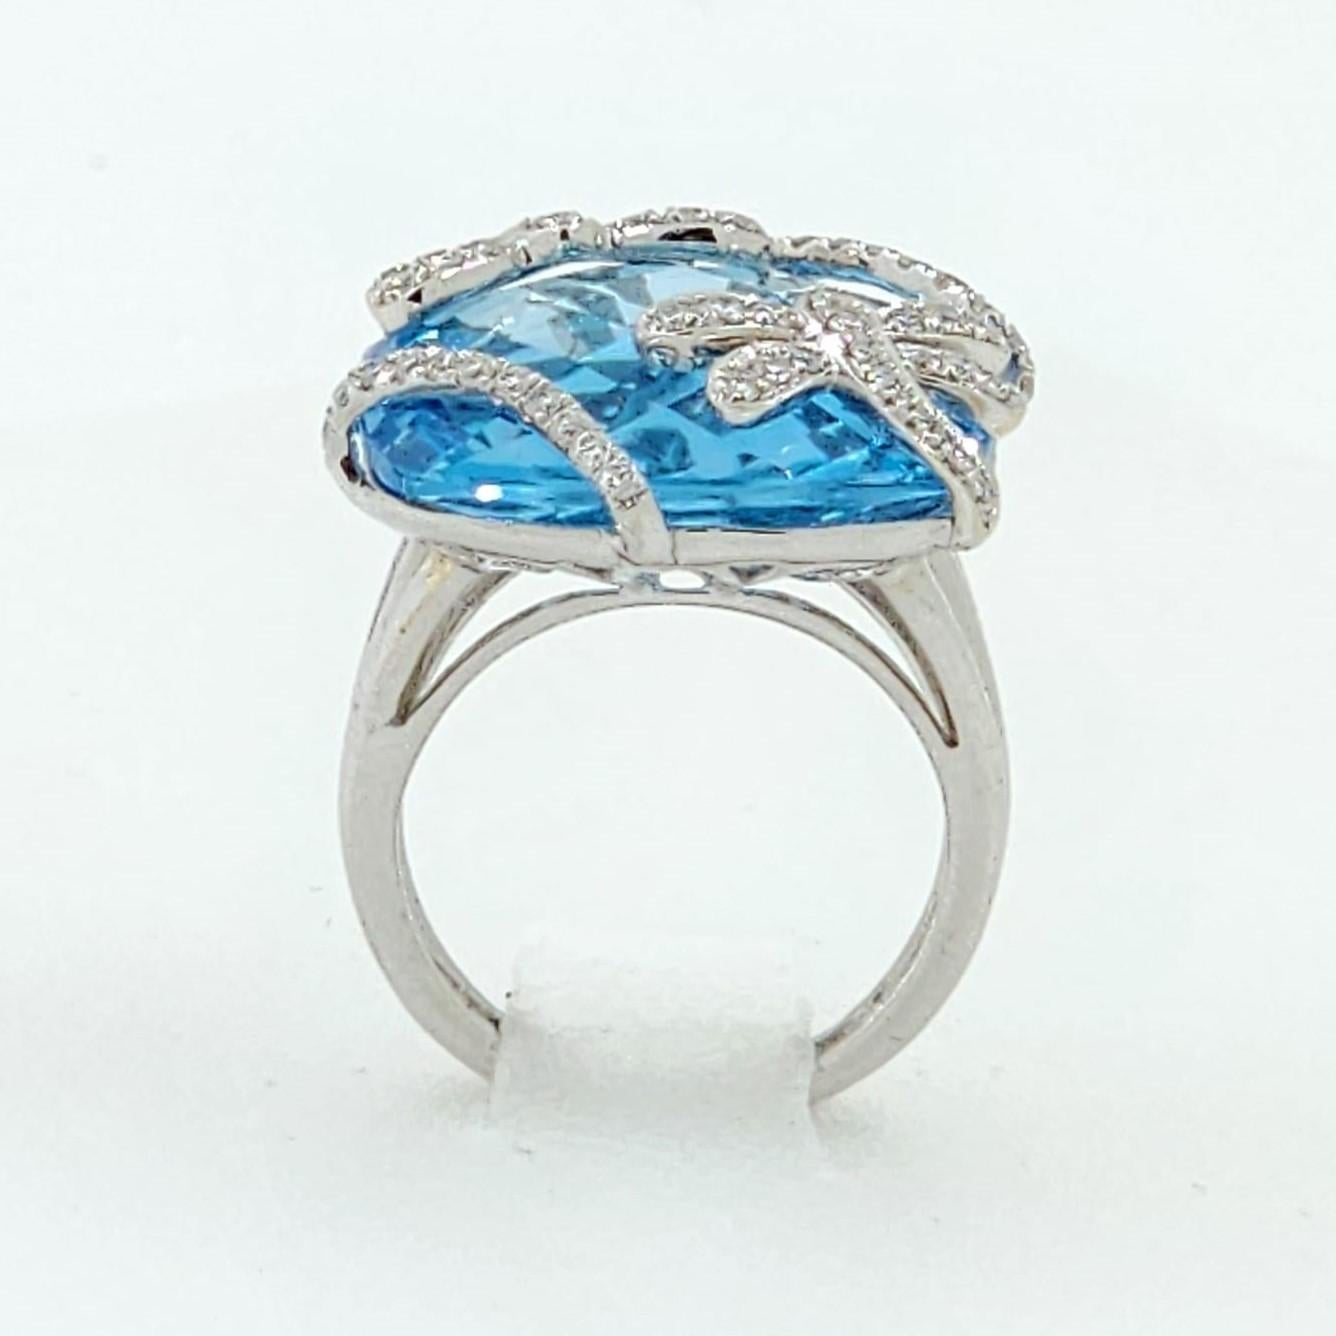 Cushion Cut Vintage 29.15 Carats Blue Topaz Diamond Cocktail Ring in 18 Karat White Gold For Sale